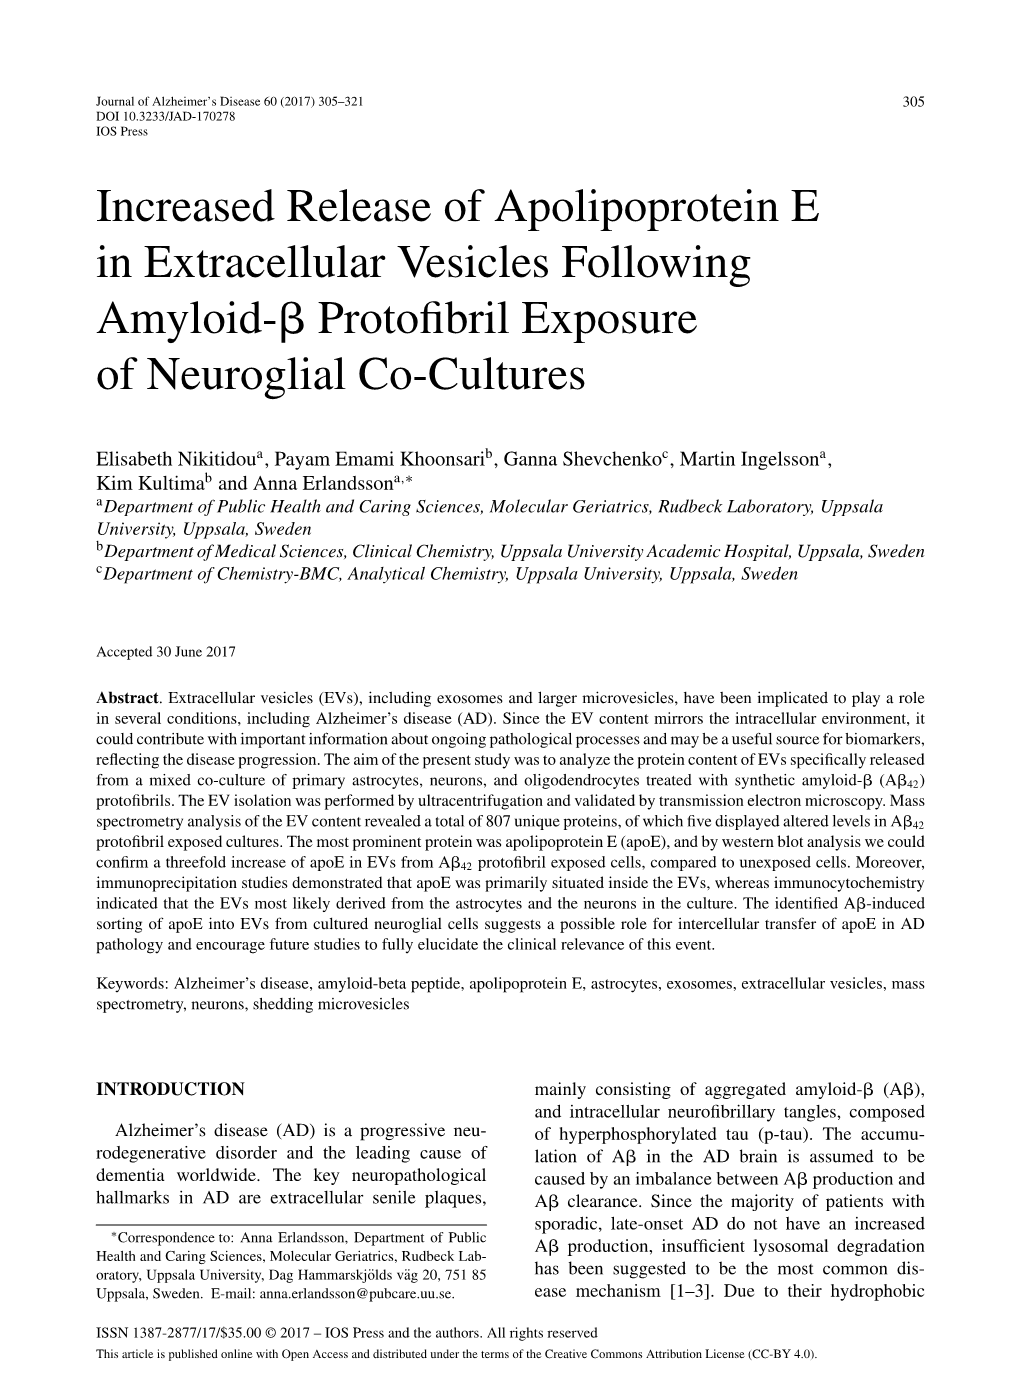 Increased Release of Apolipoprotein E in Extracellular Vesicles Following Amyloid-␤ Protoﬁbril Exposure of Neuroglial Co-Cultures